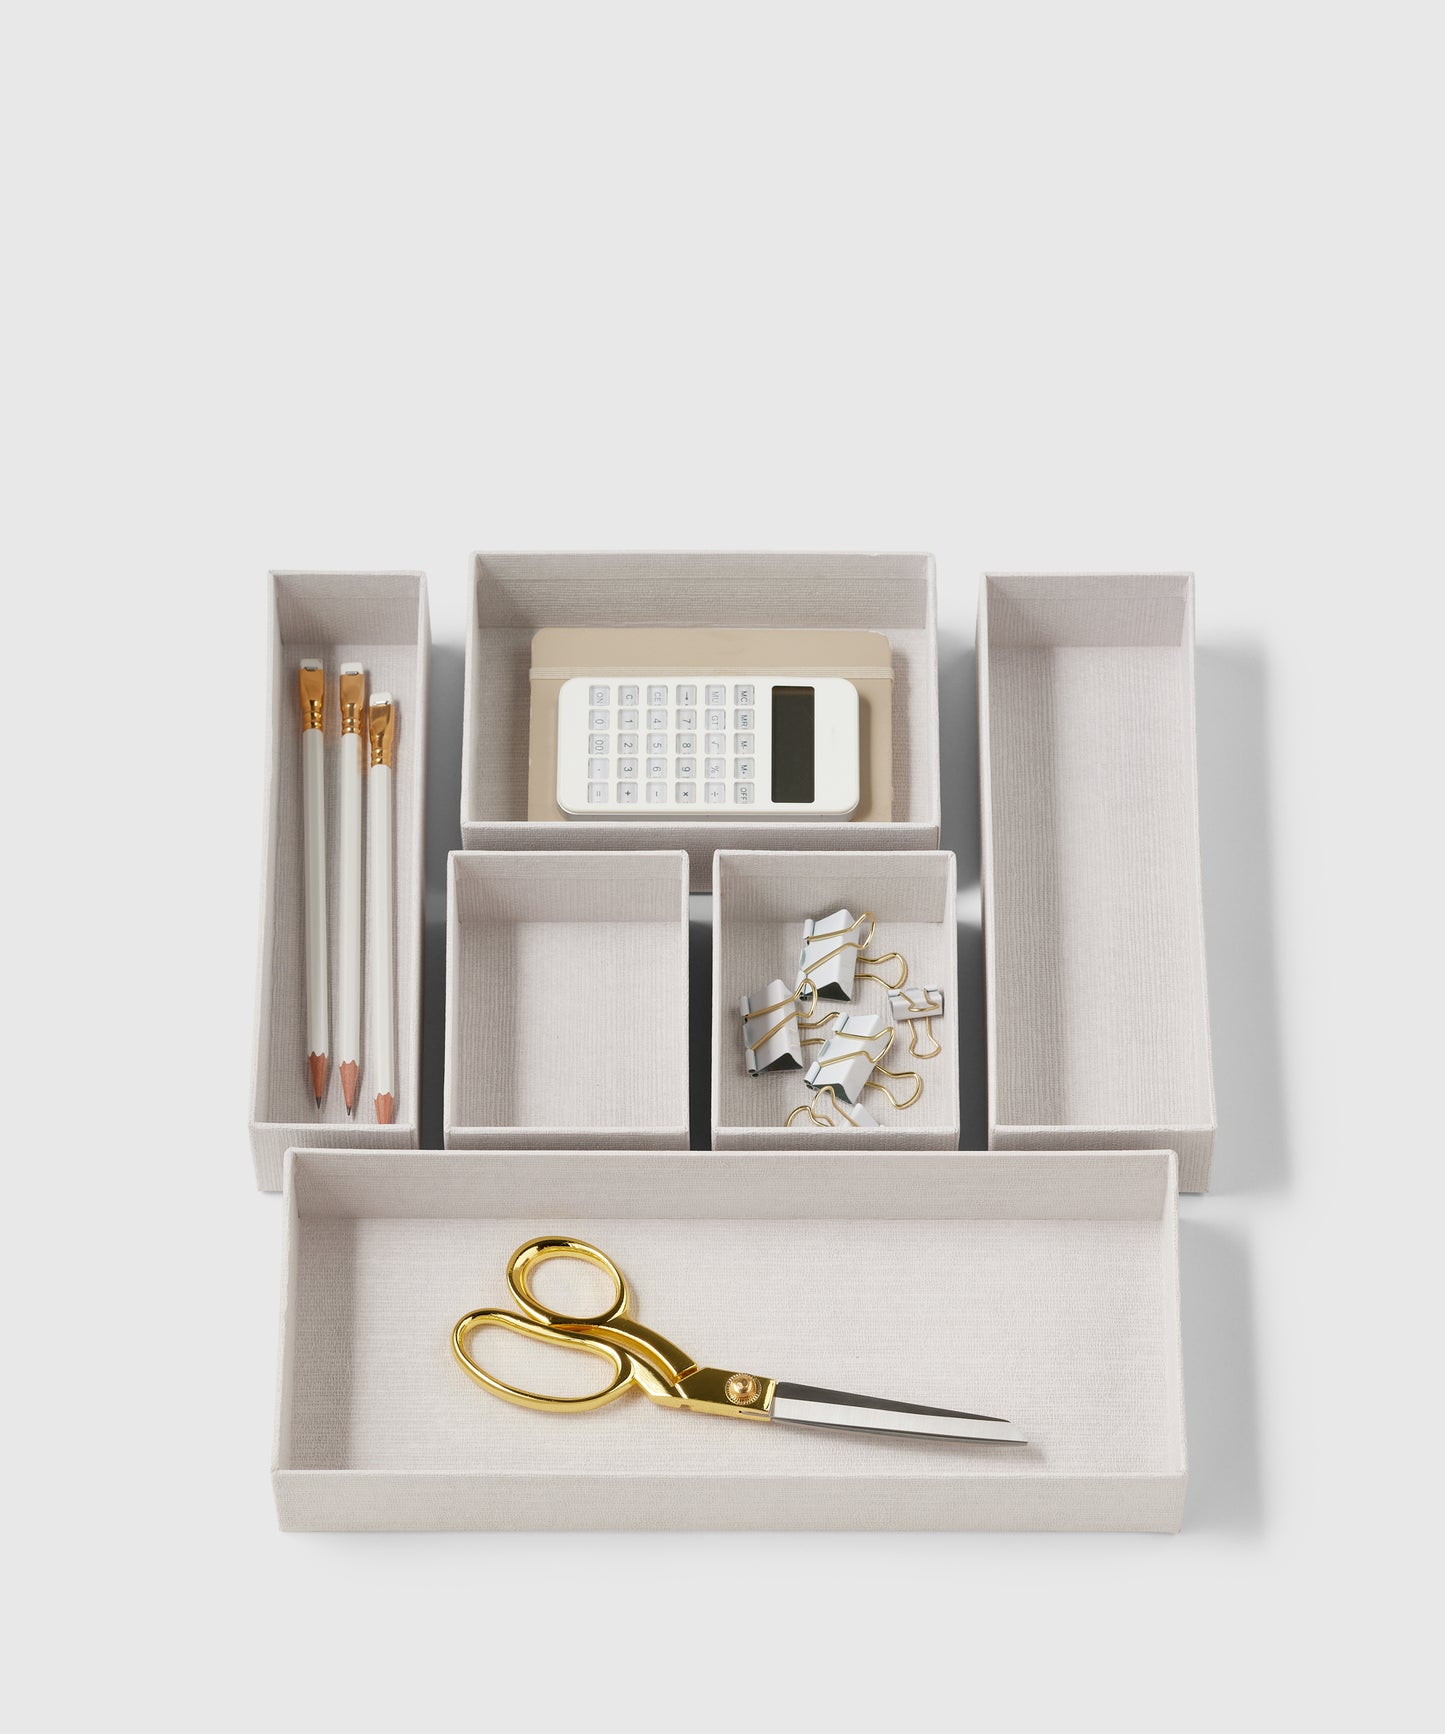 Small Drawer Organizers, Set of 6 | The Container Store x KonMari